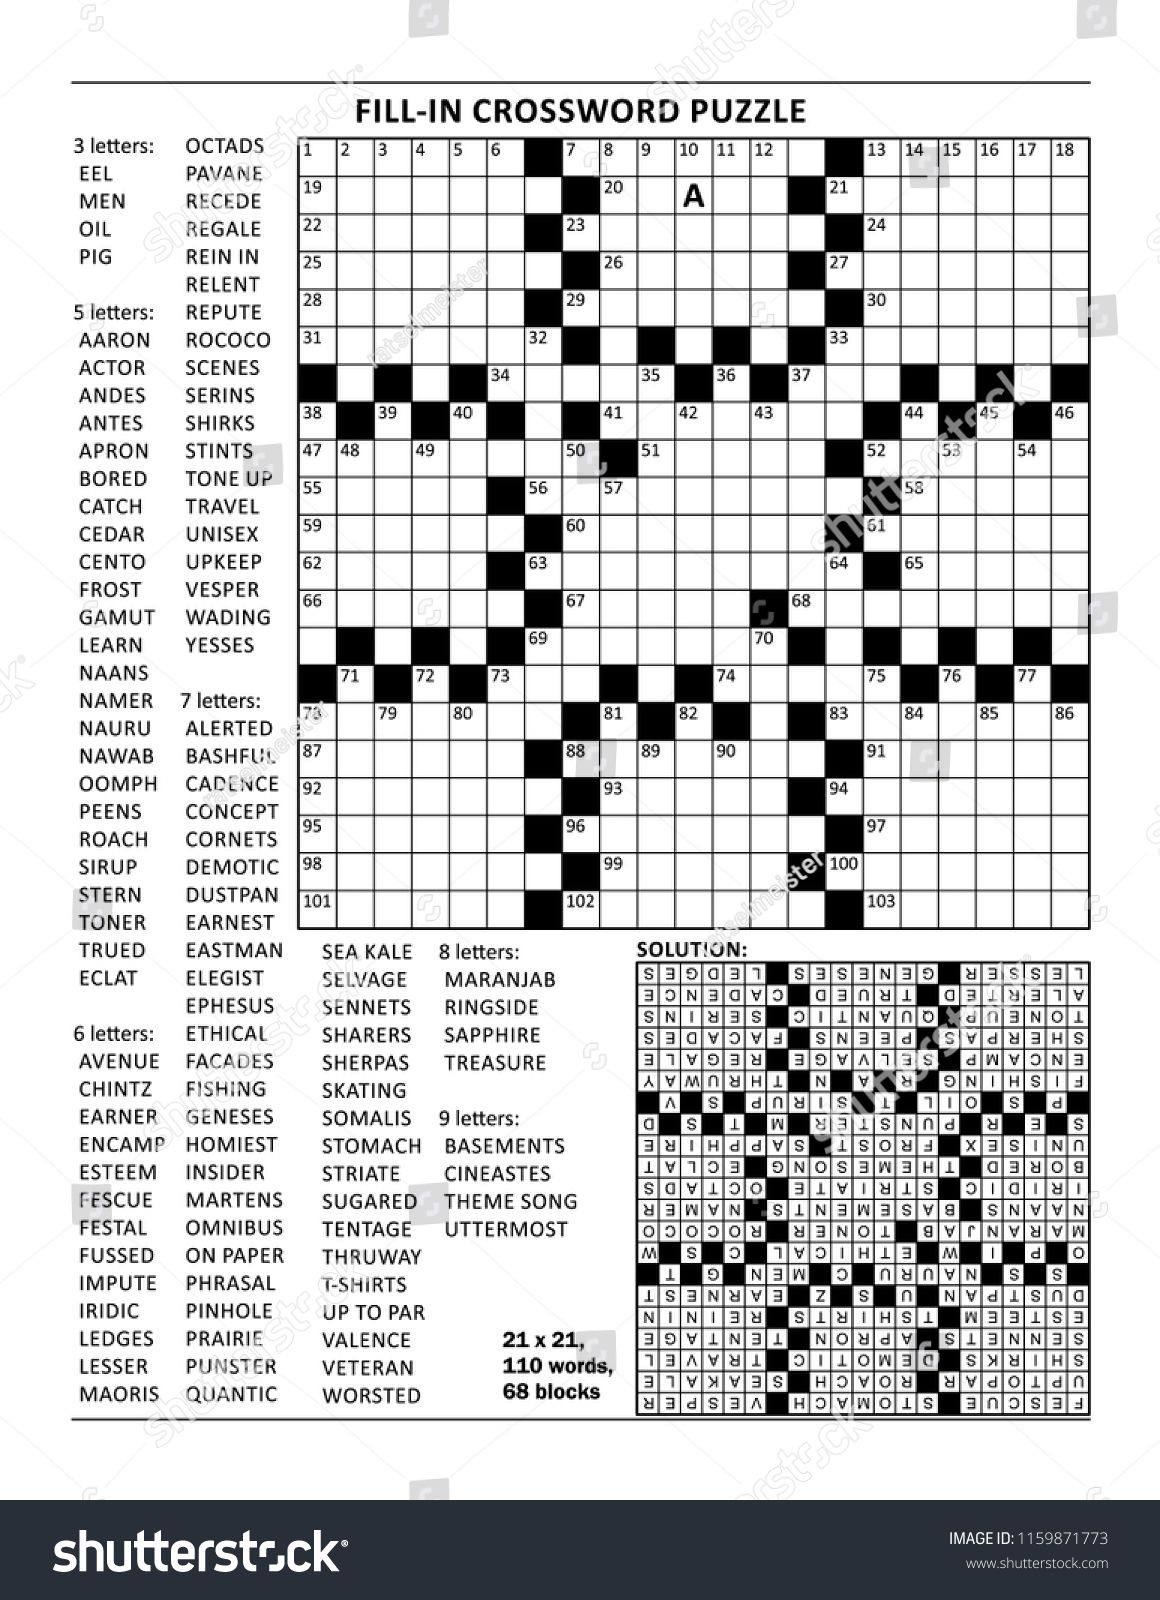 Fill In The Blanks Crossword Puzzle With American Style Grid Of - Blank Crossword Puzzle Grids Printable